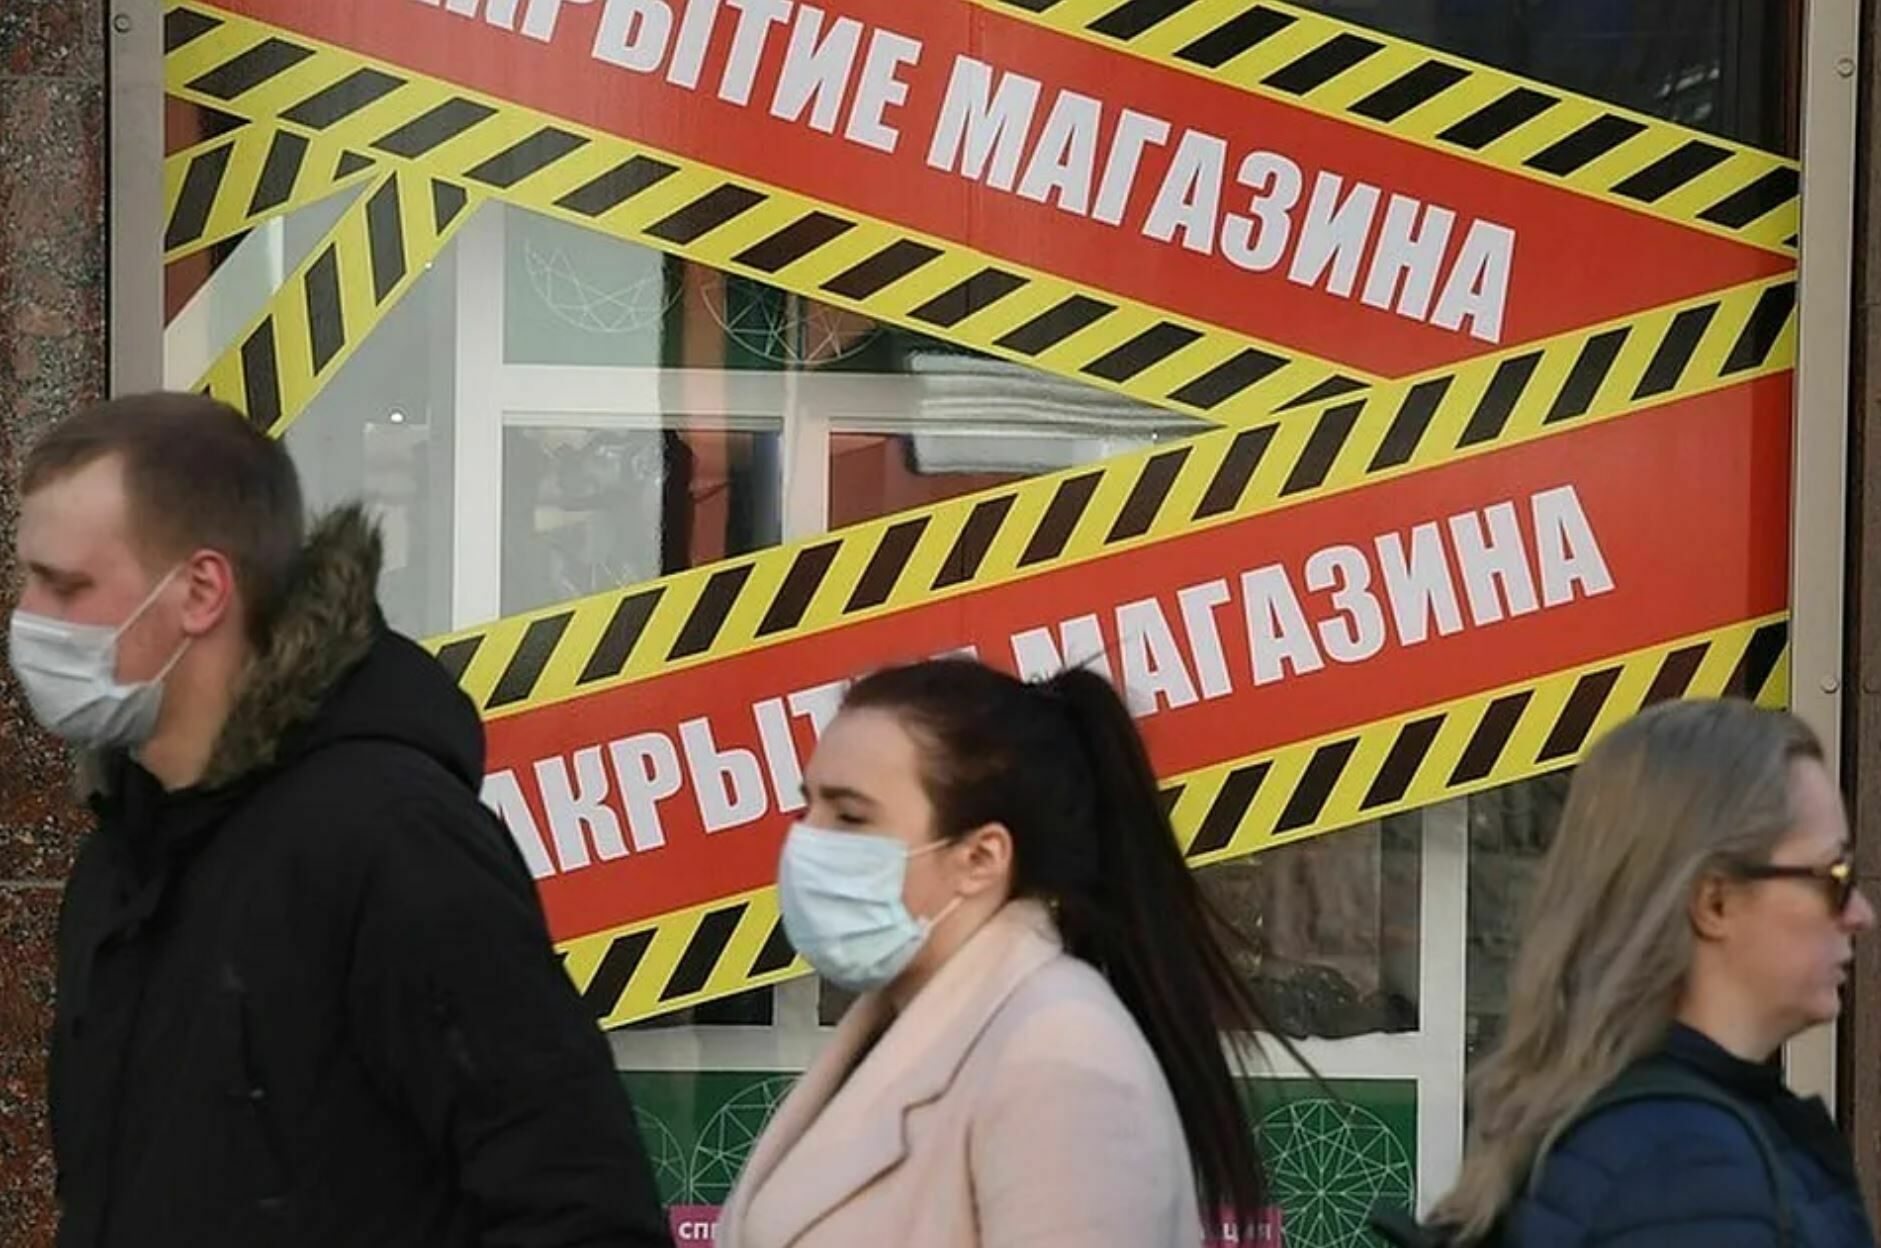 Every tenth company in Russia is afraid of shutting down